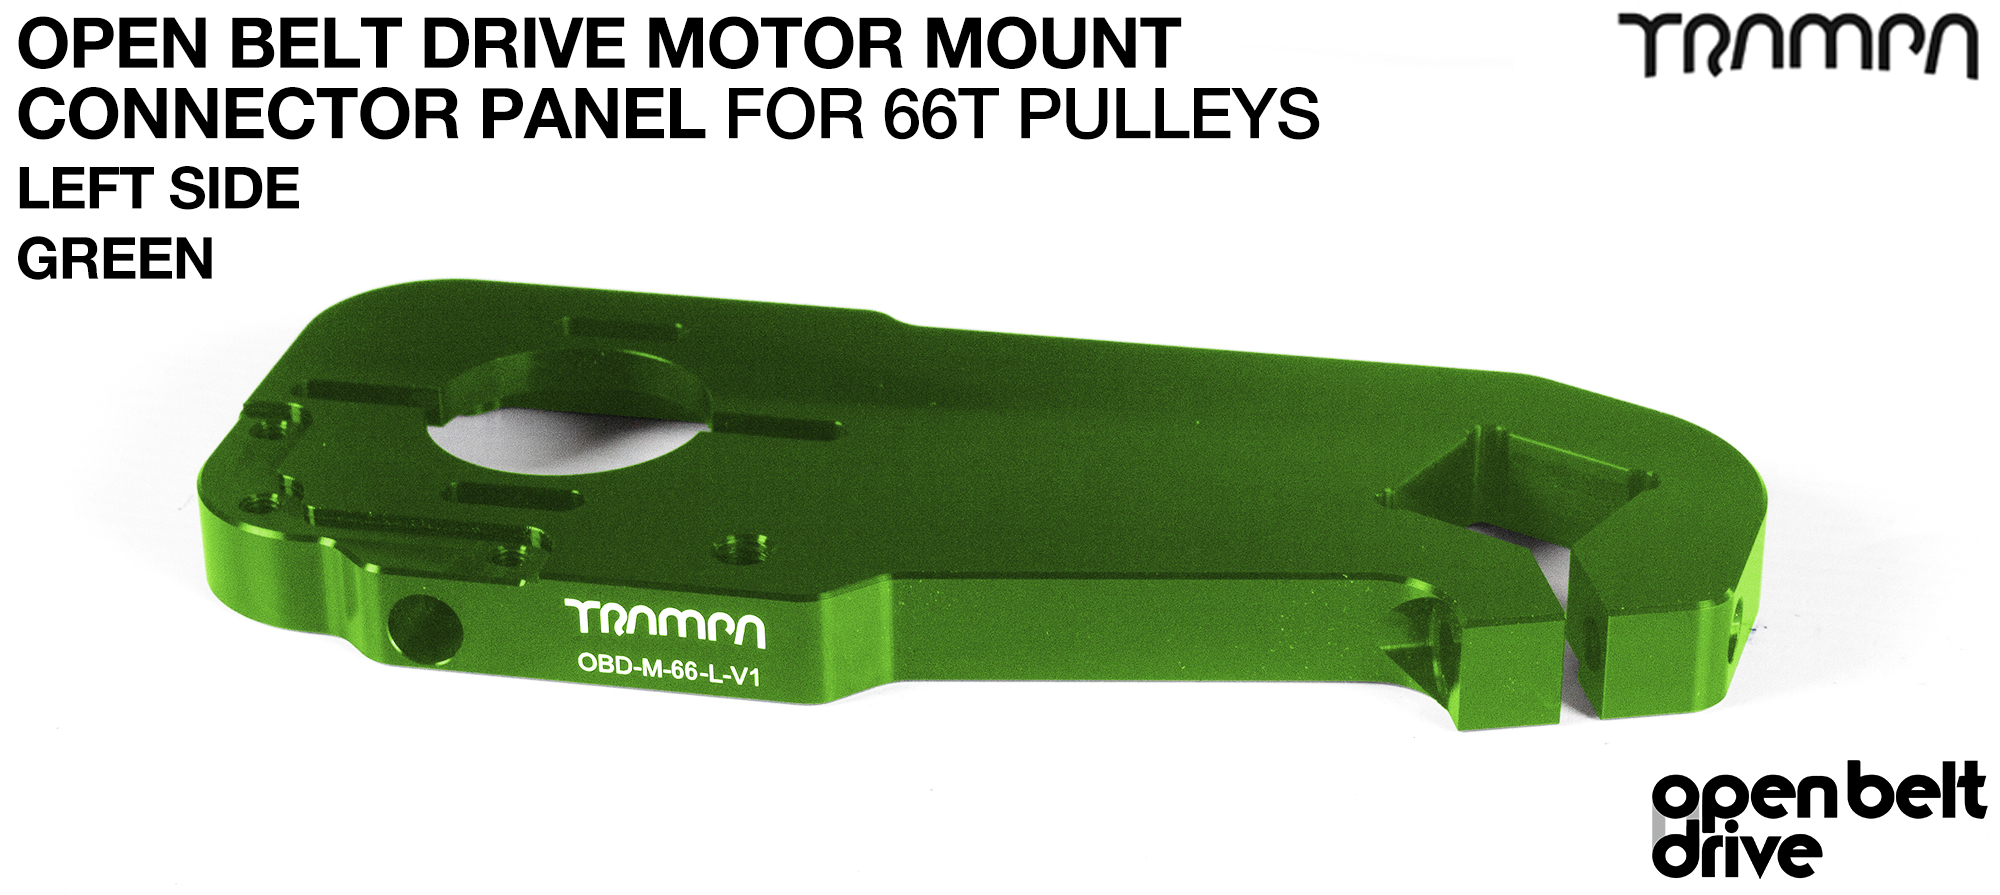 OBD Motor Mount Connector Panel for 66 tooth Pulleys - REGULAR - GREEN